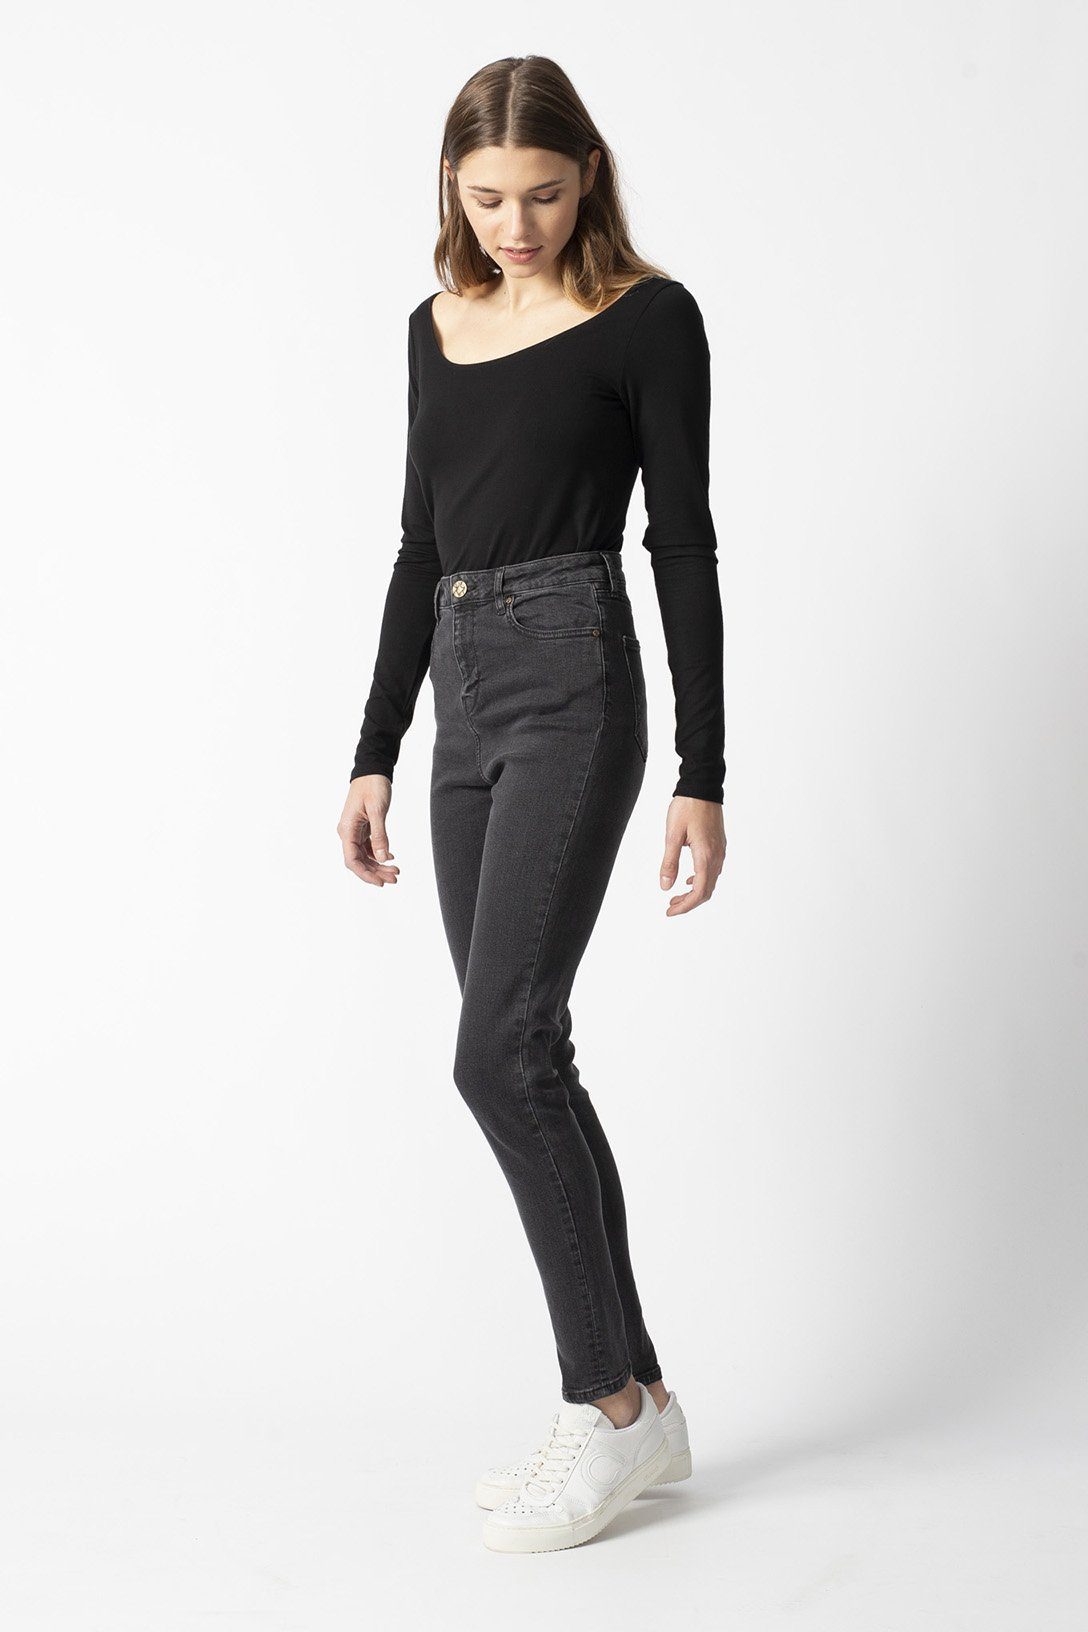 CARRIE dark grey - GOTS organic cotton Jeans by UCM